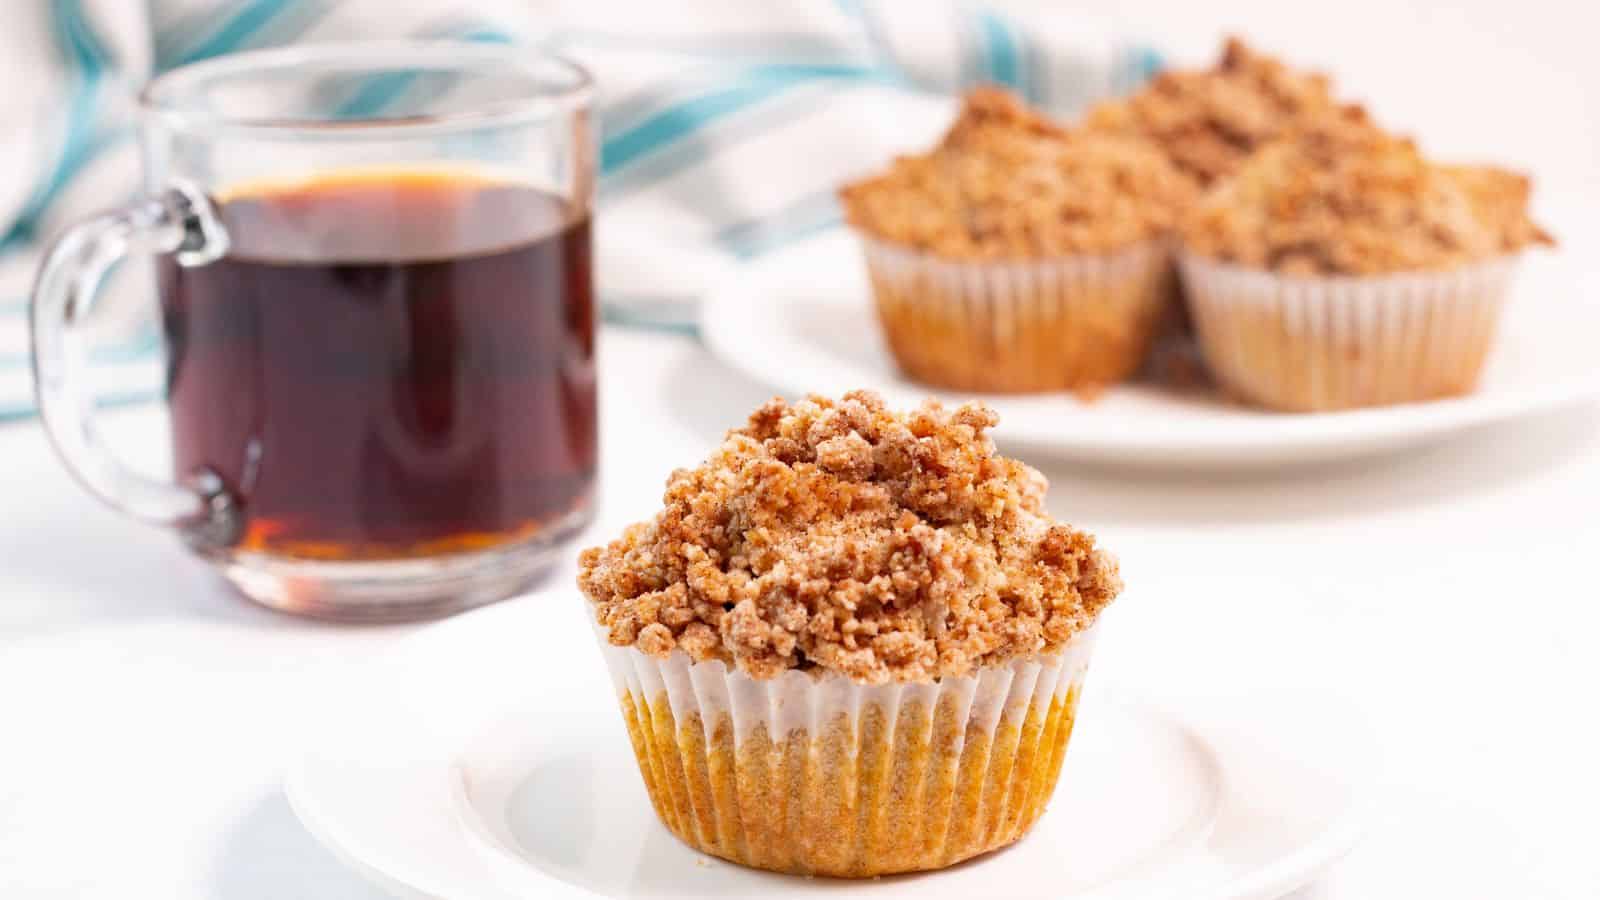 A coffee cake muffin with a crumbly topping on a white plate, next to a glass of black coffee and another muffin in the background.